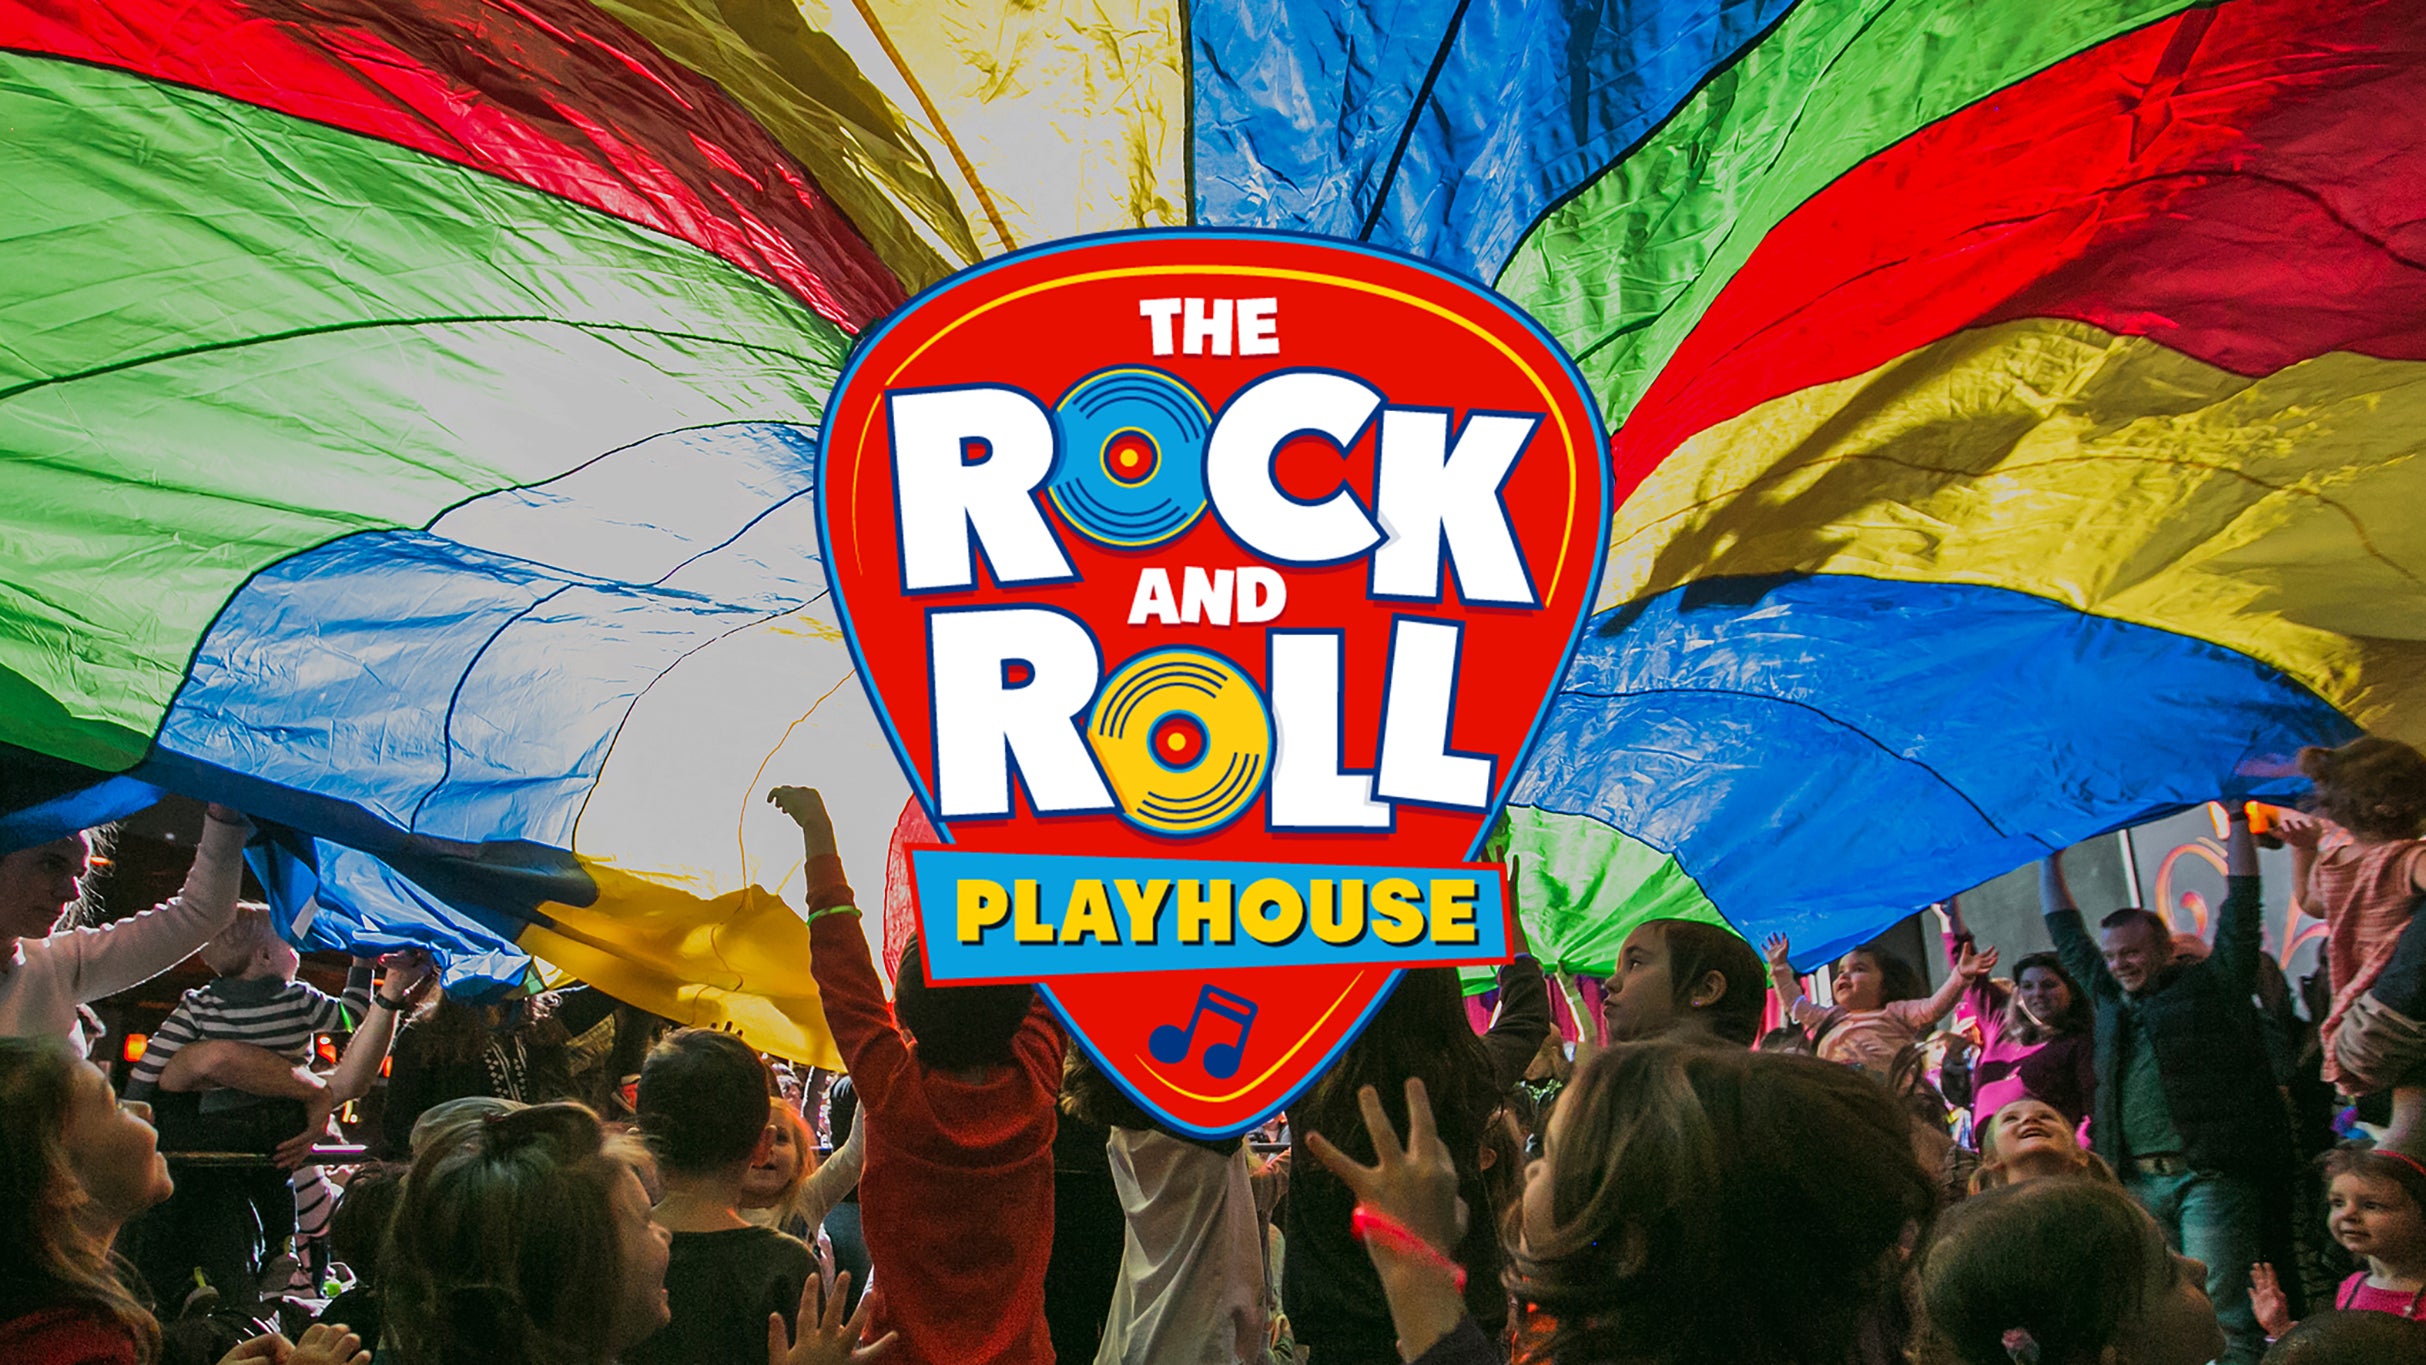 Rock And Roll Playhouse Plays Music Of Grateful Dead + More For Kids presales in Red Bank